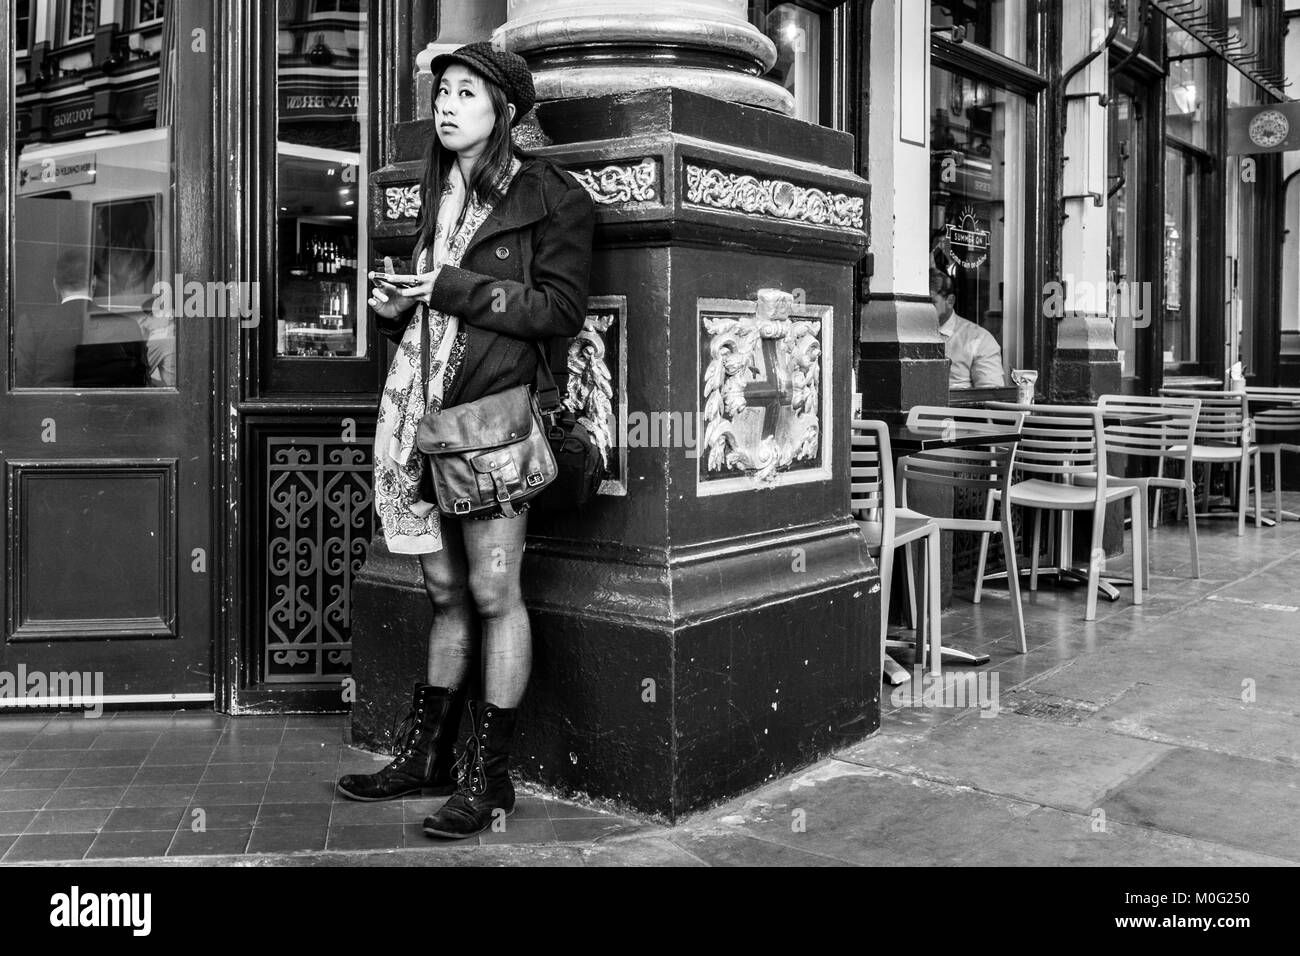 London black and white street photography: Young woman on mobile phone in Leadenhall Market, City of London. Stock Photo